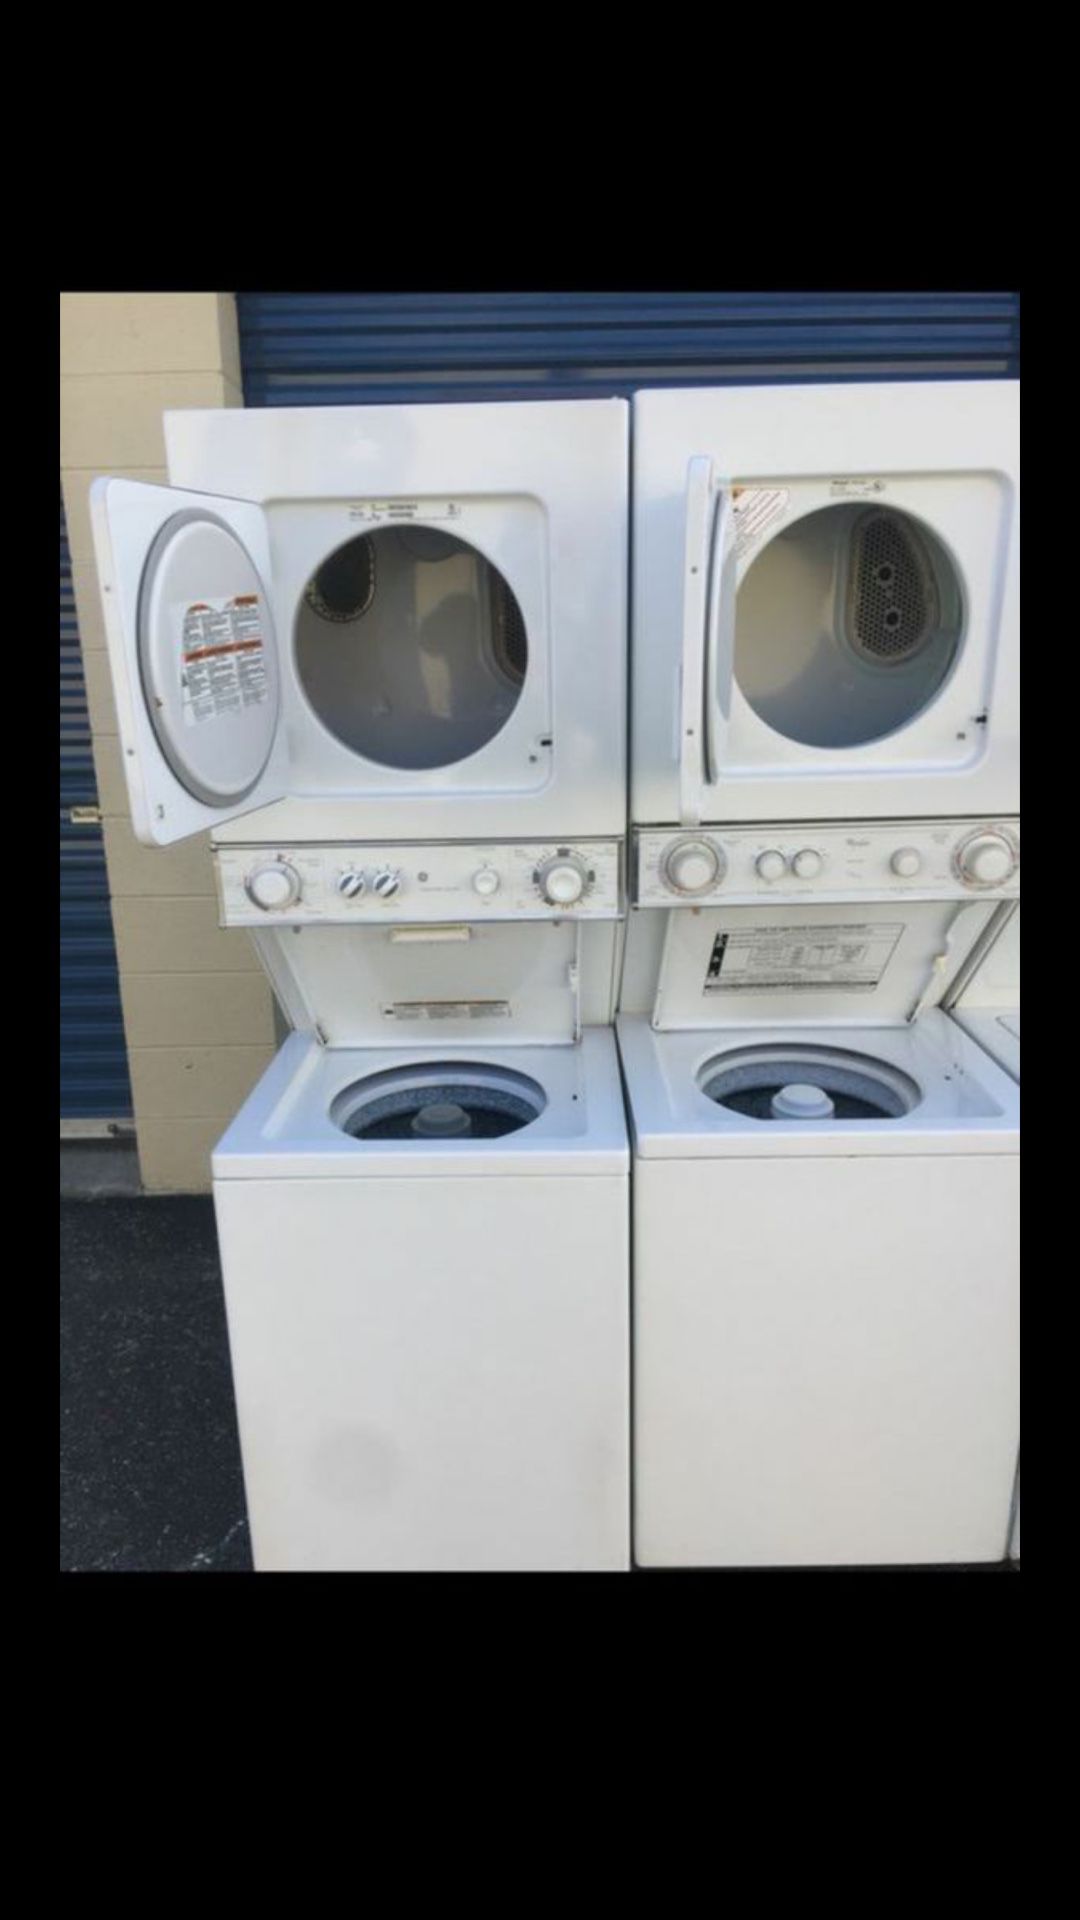 NICE CLEAN WHIRLPOOL 24” thin twin stackable washer & dryer unit.$320 DELIVERED/INSTALLED.$285 picked up. 4 month warranty!